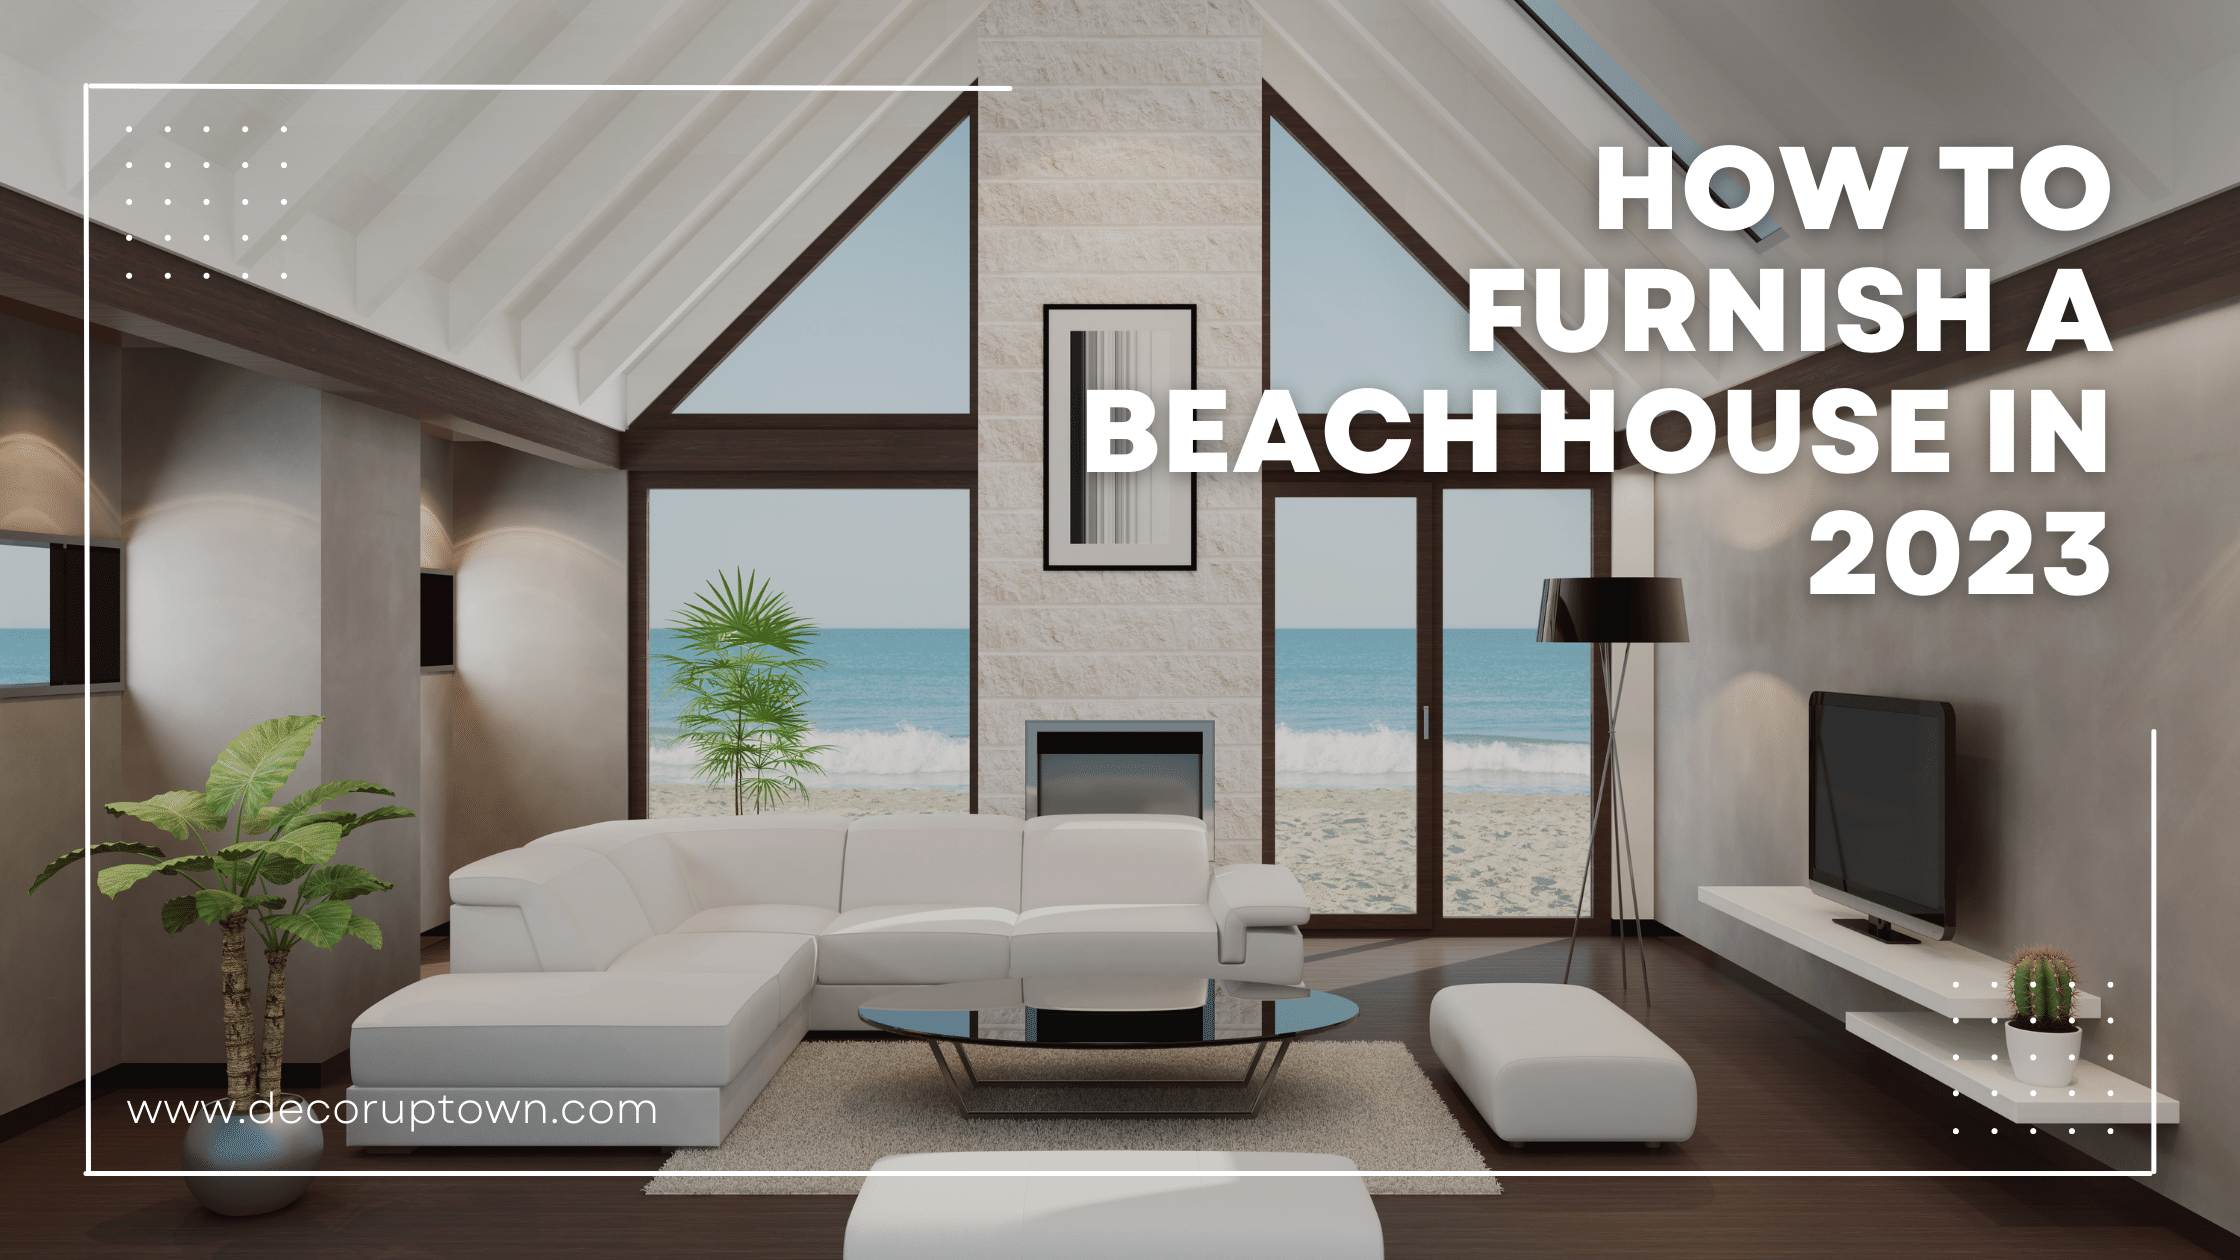 How to Furnish a Beach House in 2023